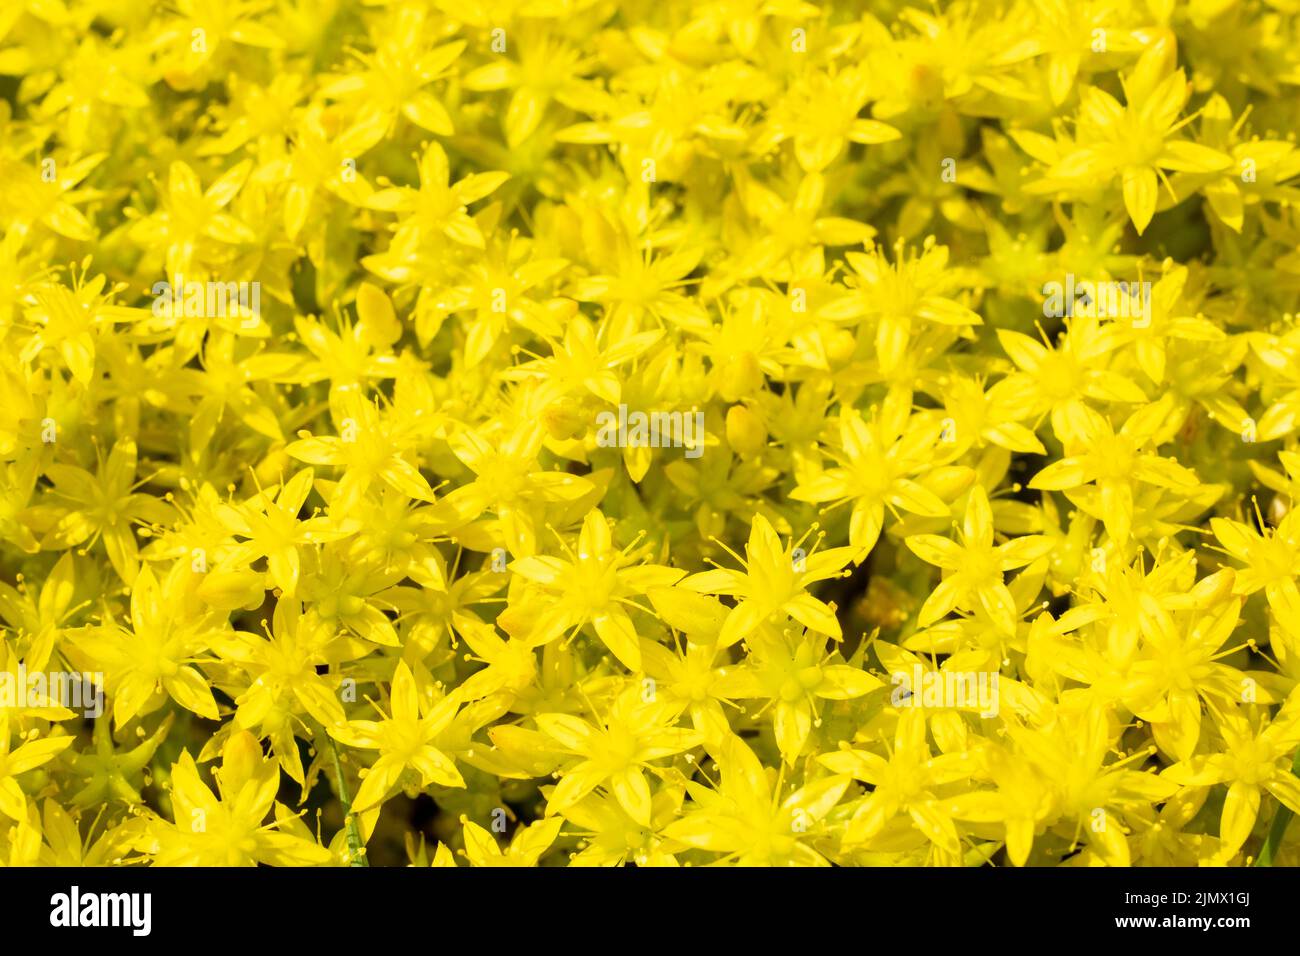 Curative plant used in homeopathy yellow St. Johns wort flowers, sedum acre, or acrid stonecrop, growing large bush in the field Stock Photo